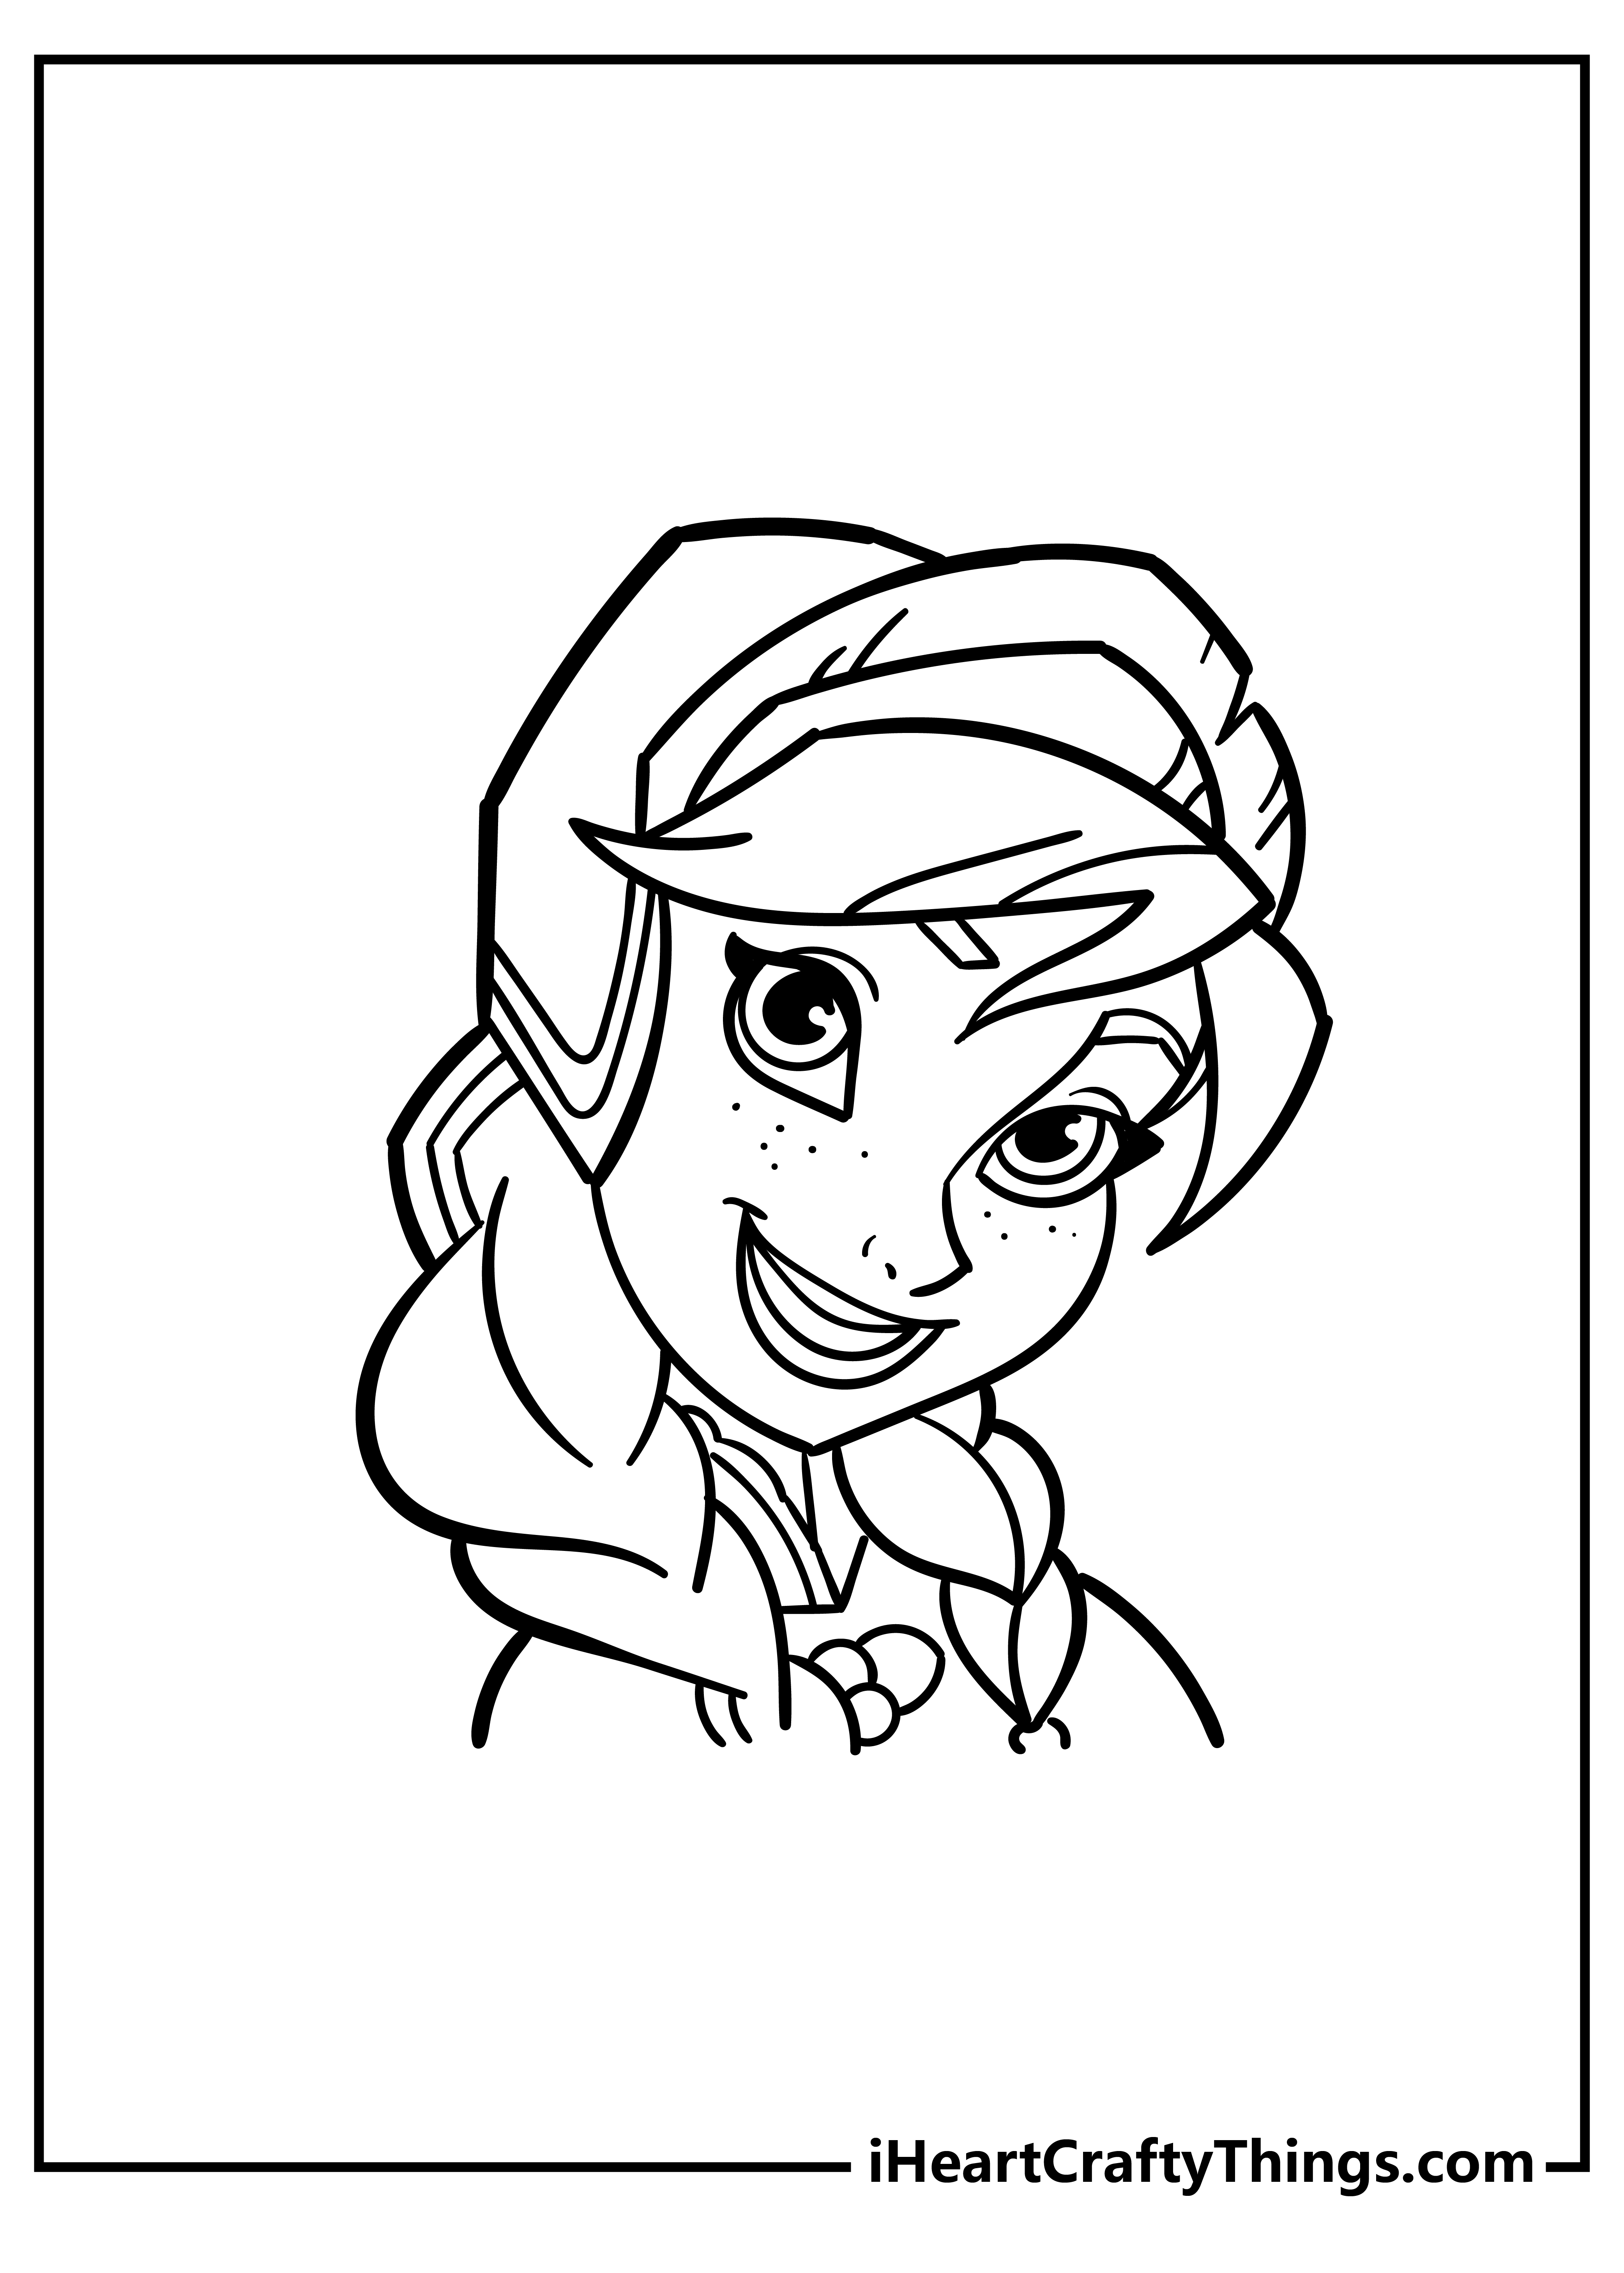 Anna Coloring Pages for adults free printable